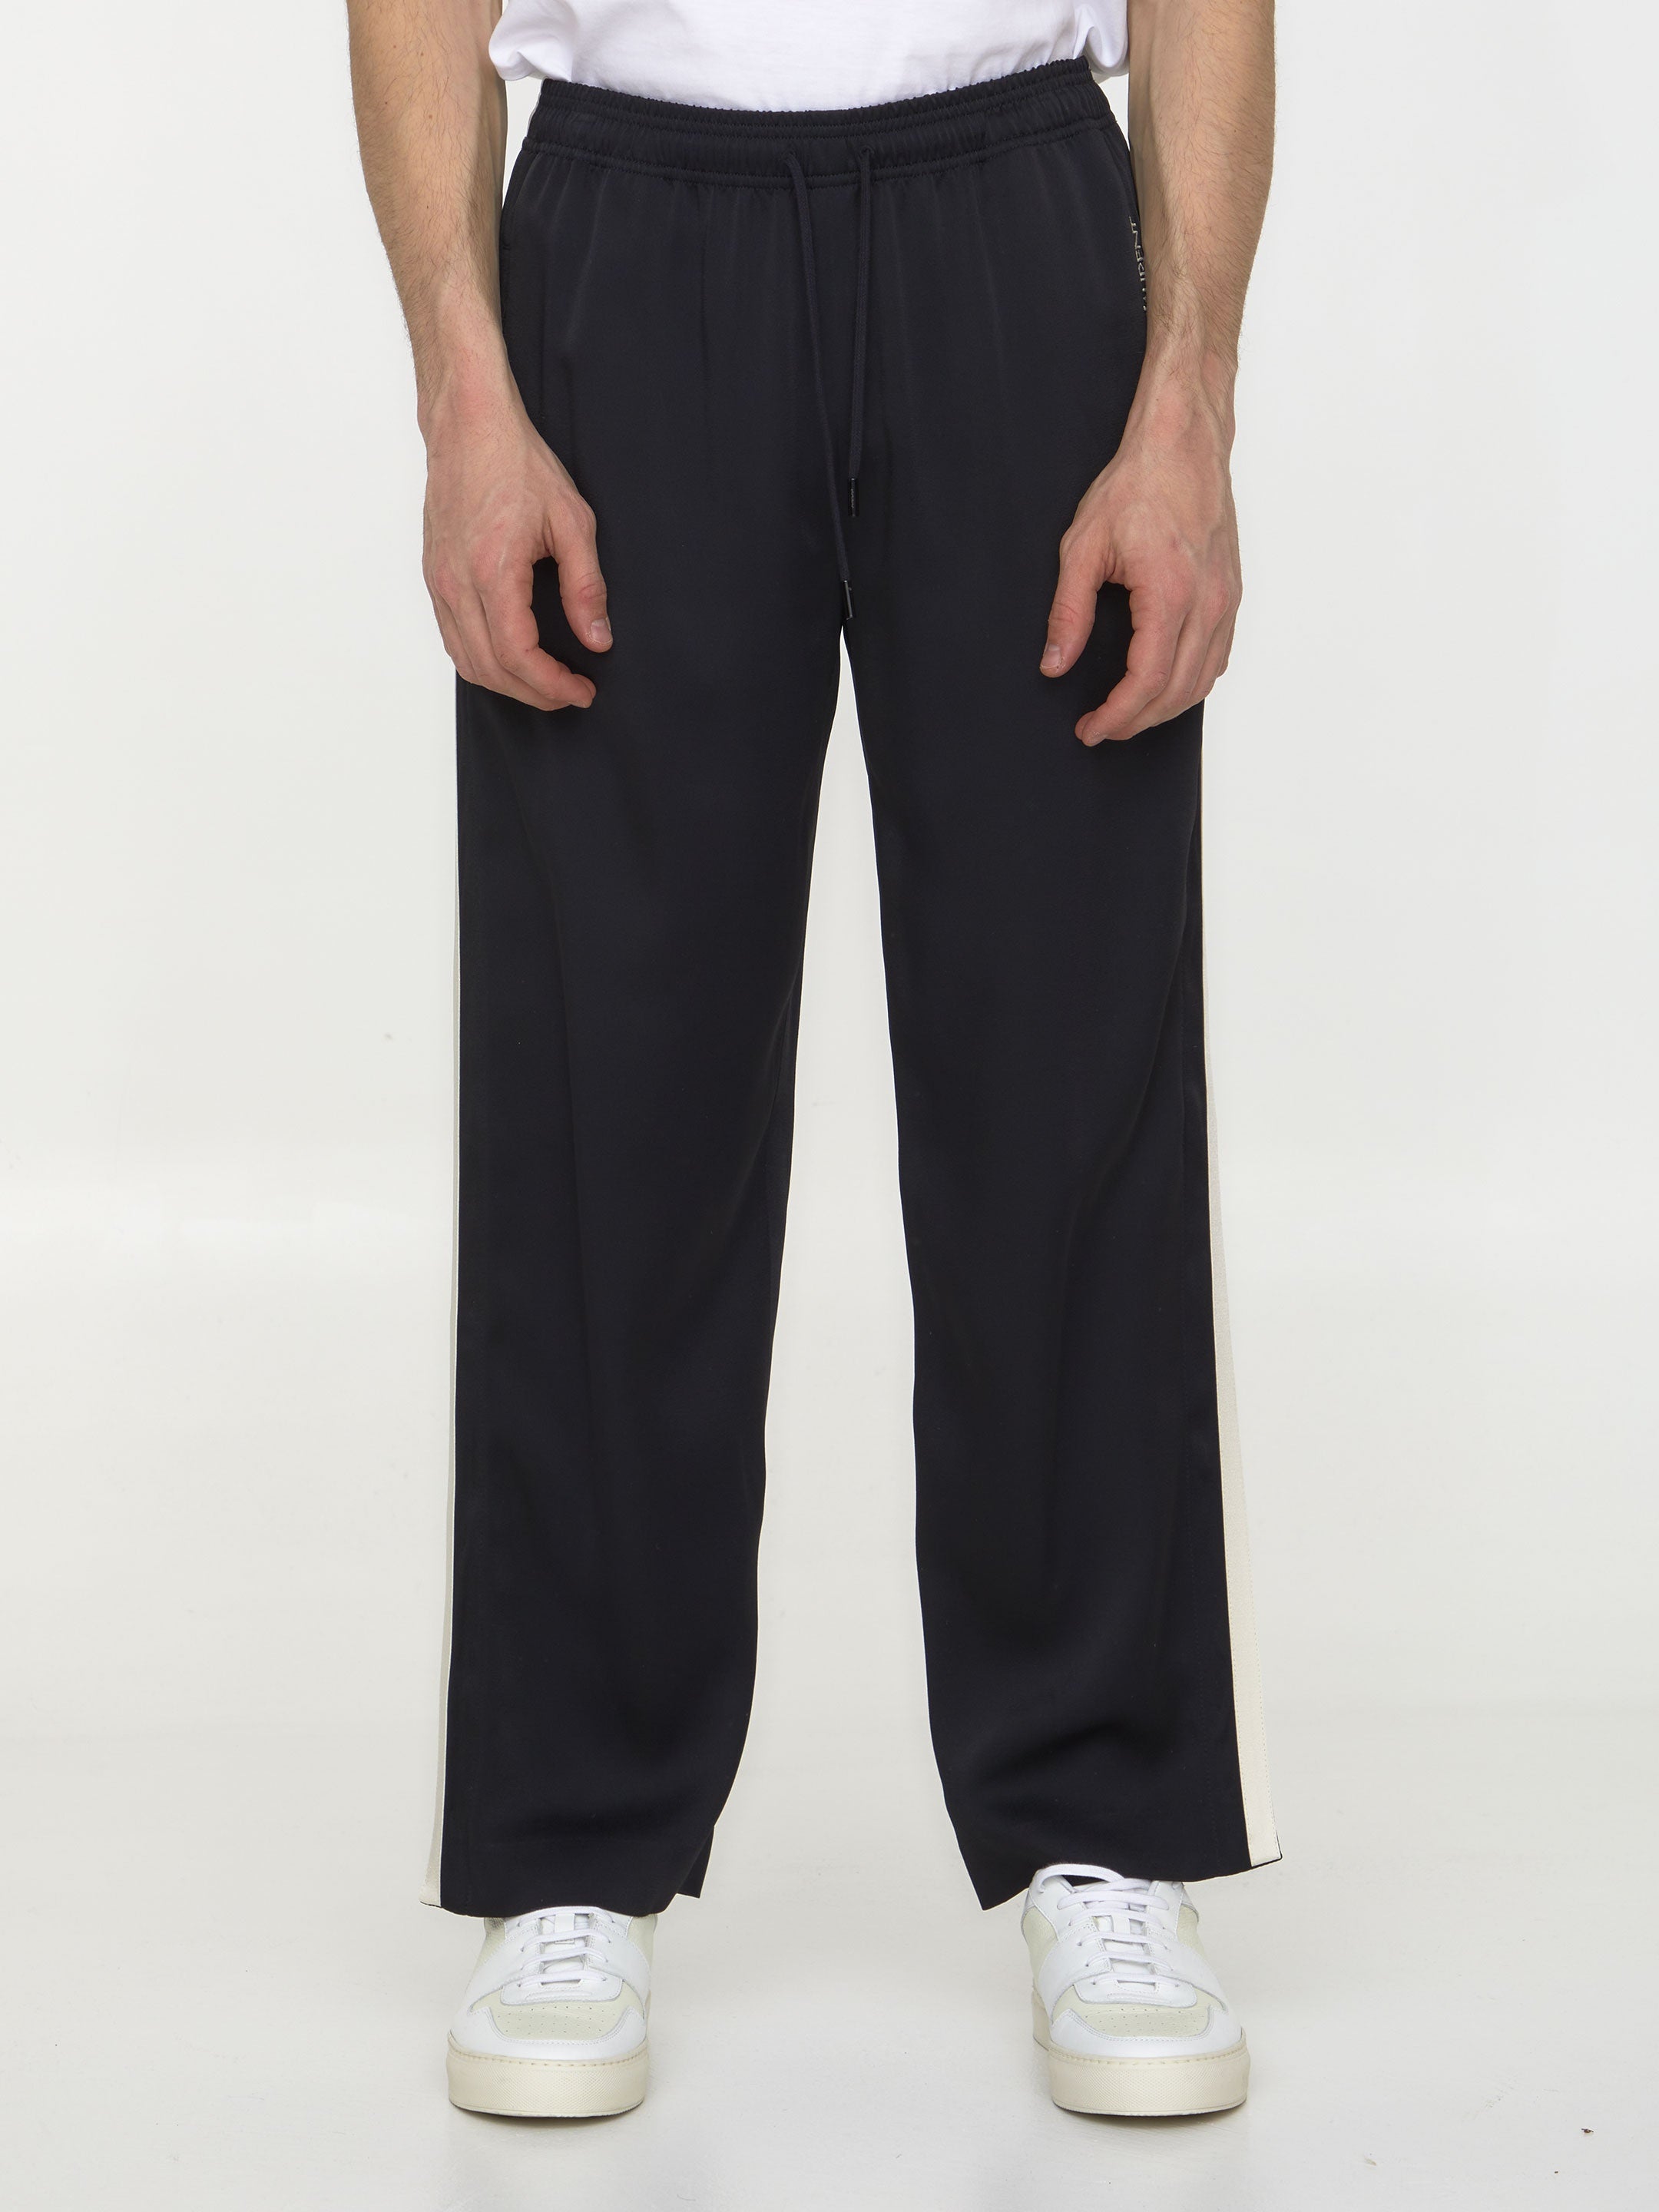 Saint Laurent embroidered joggers